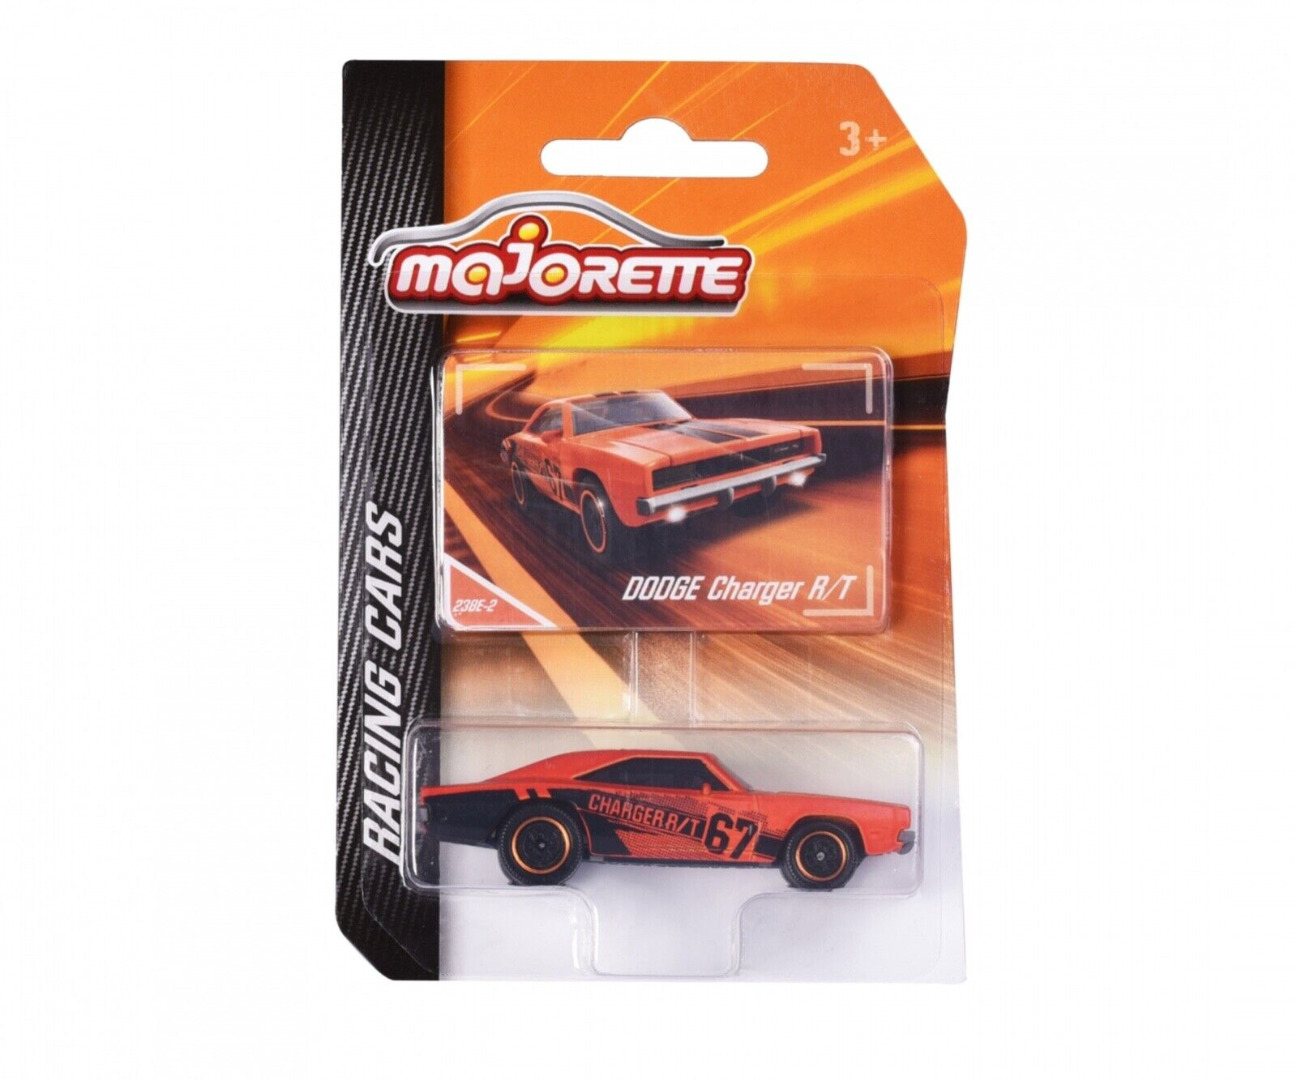 Majorette Racing Cars Dodge Charger R/T 1/64